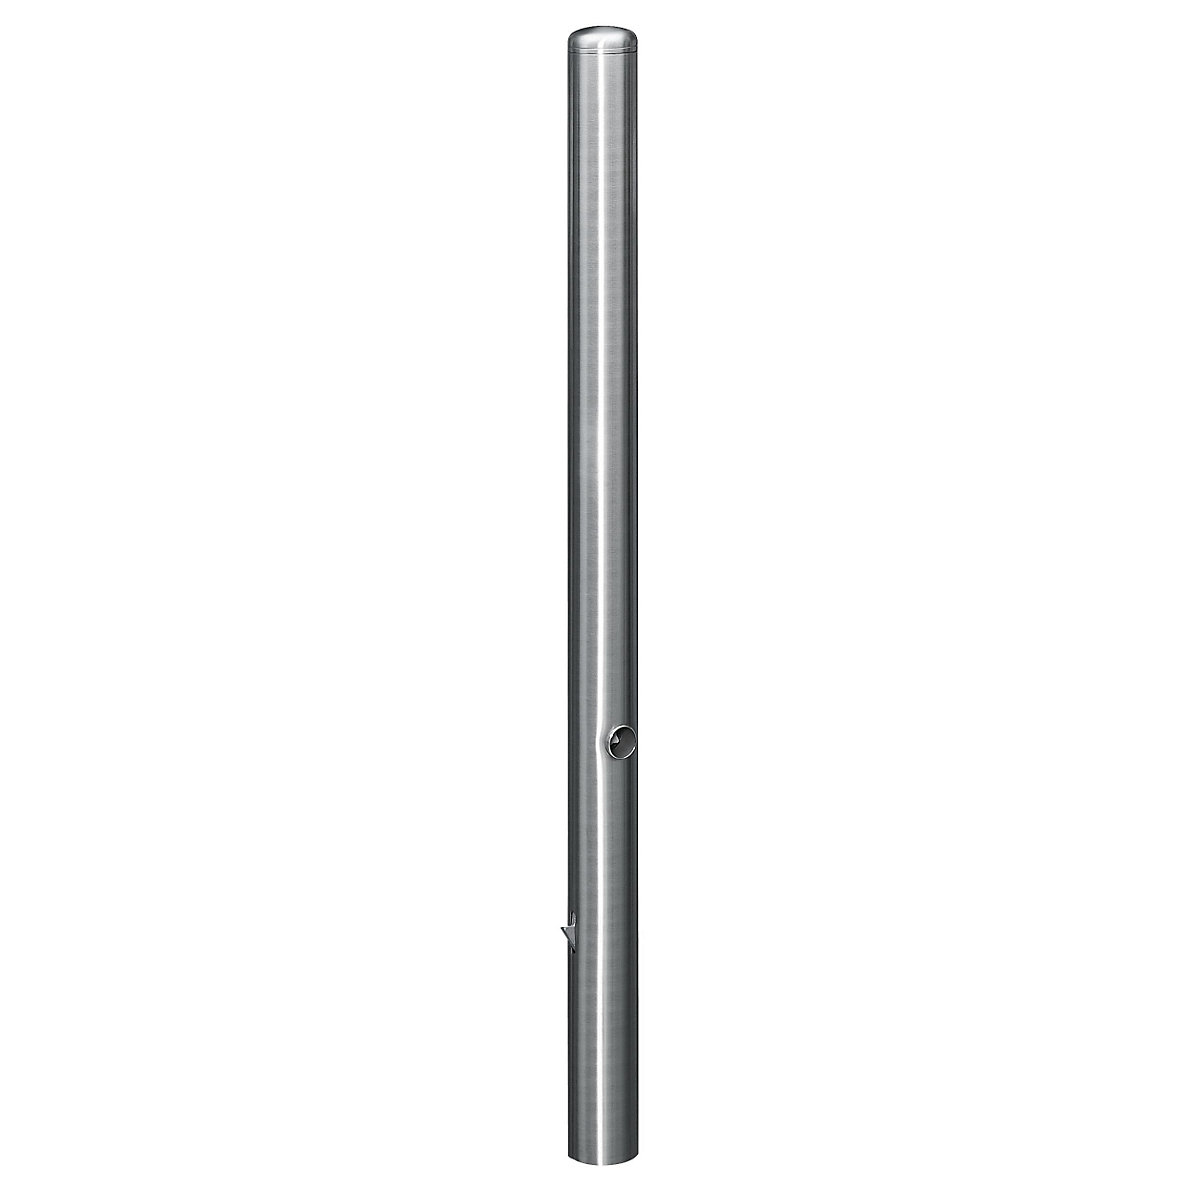 Stainless steel barrier post, with end cap, ground sleeve for concreting in, Ø 76 mm, triangular lock-8